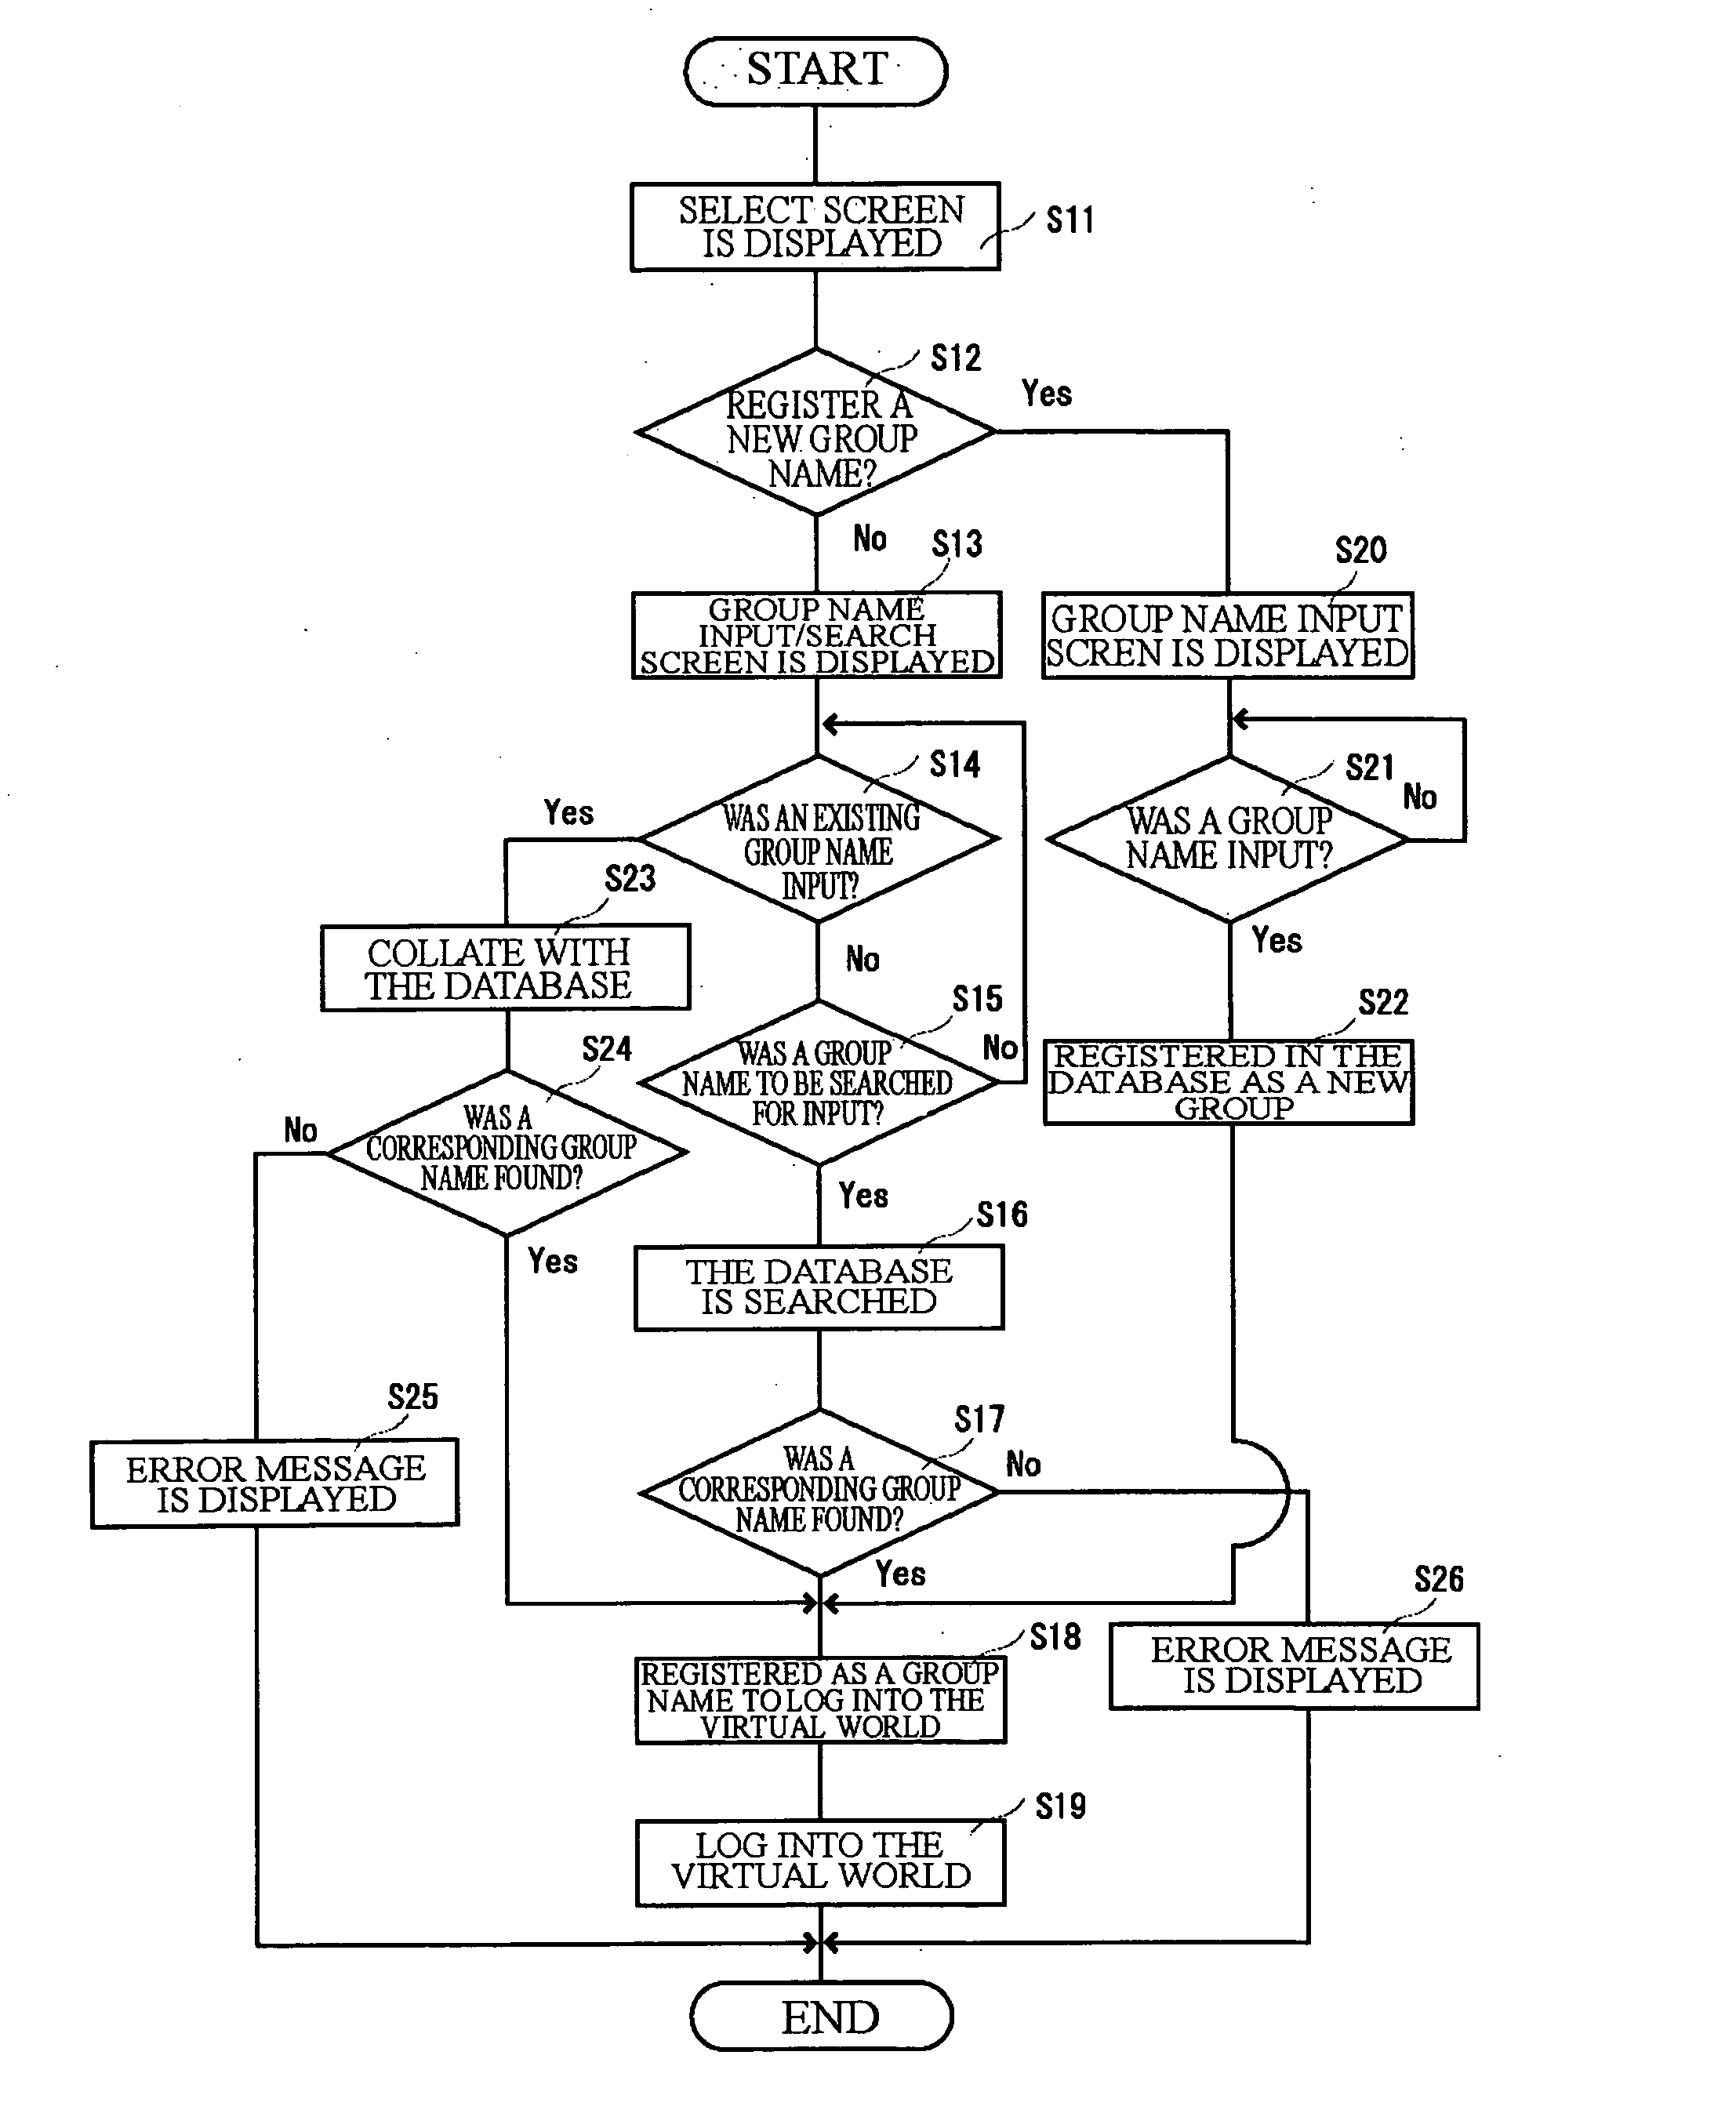 Object display system in a virtual world